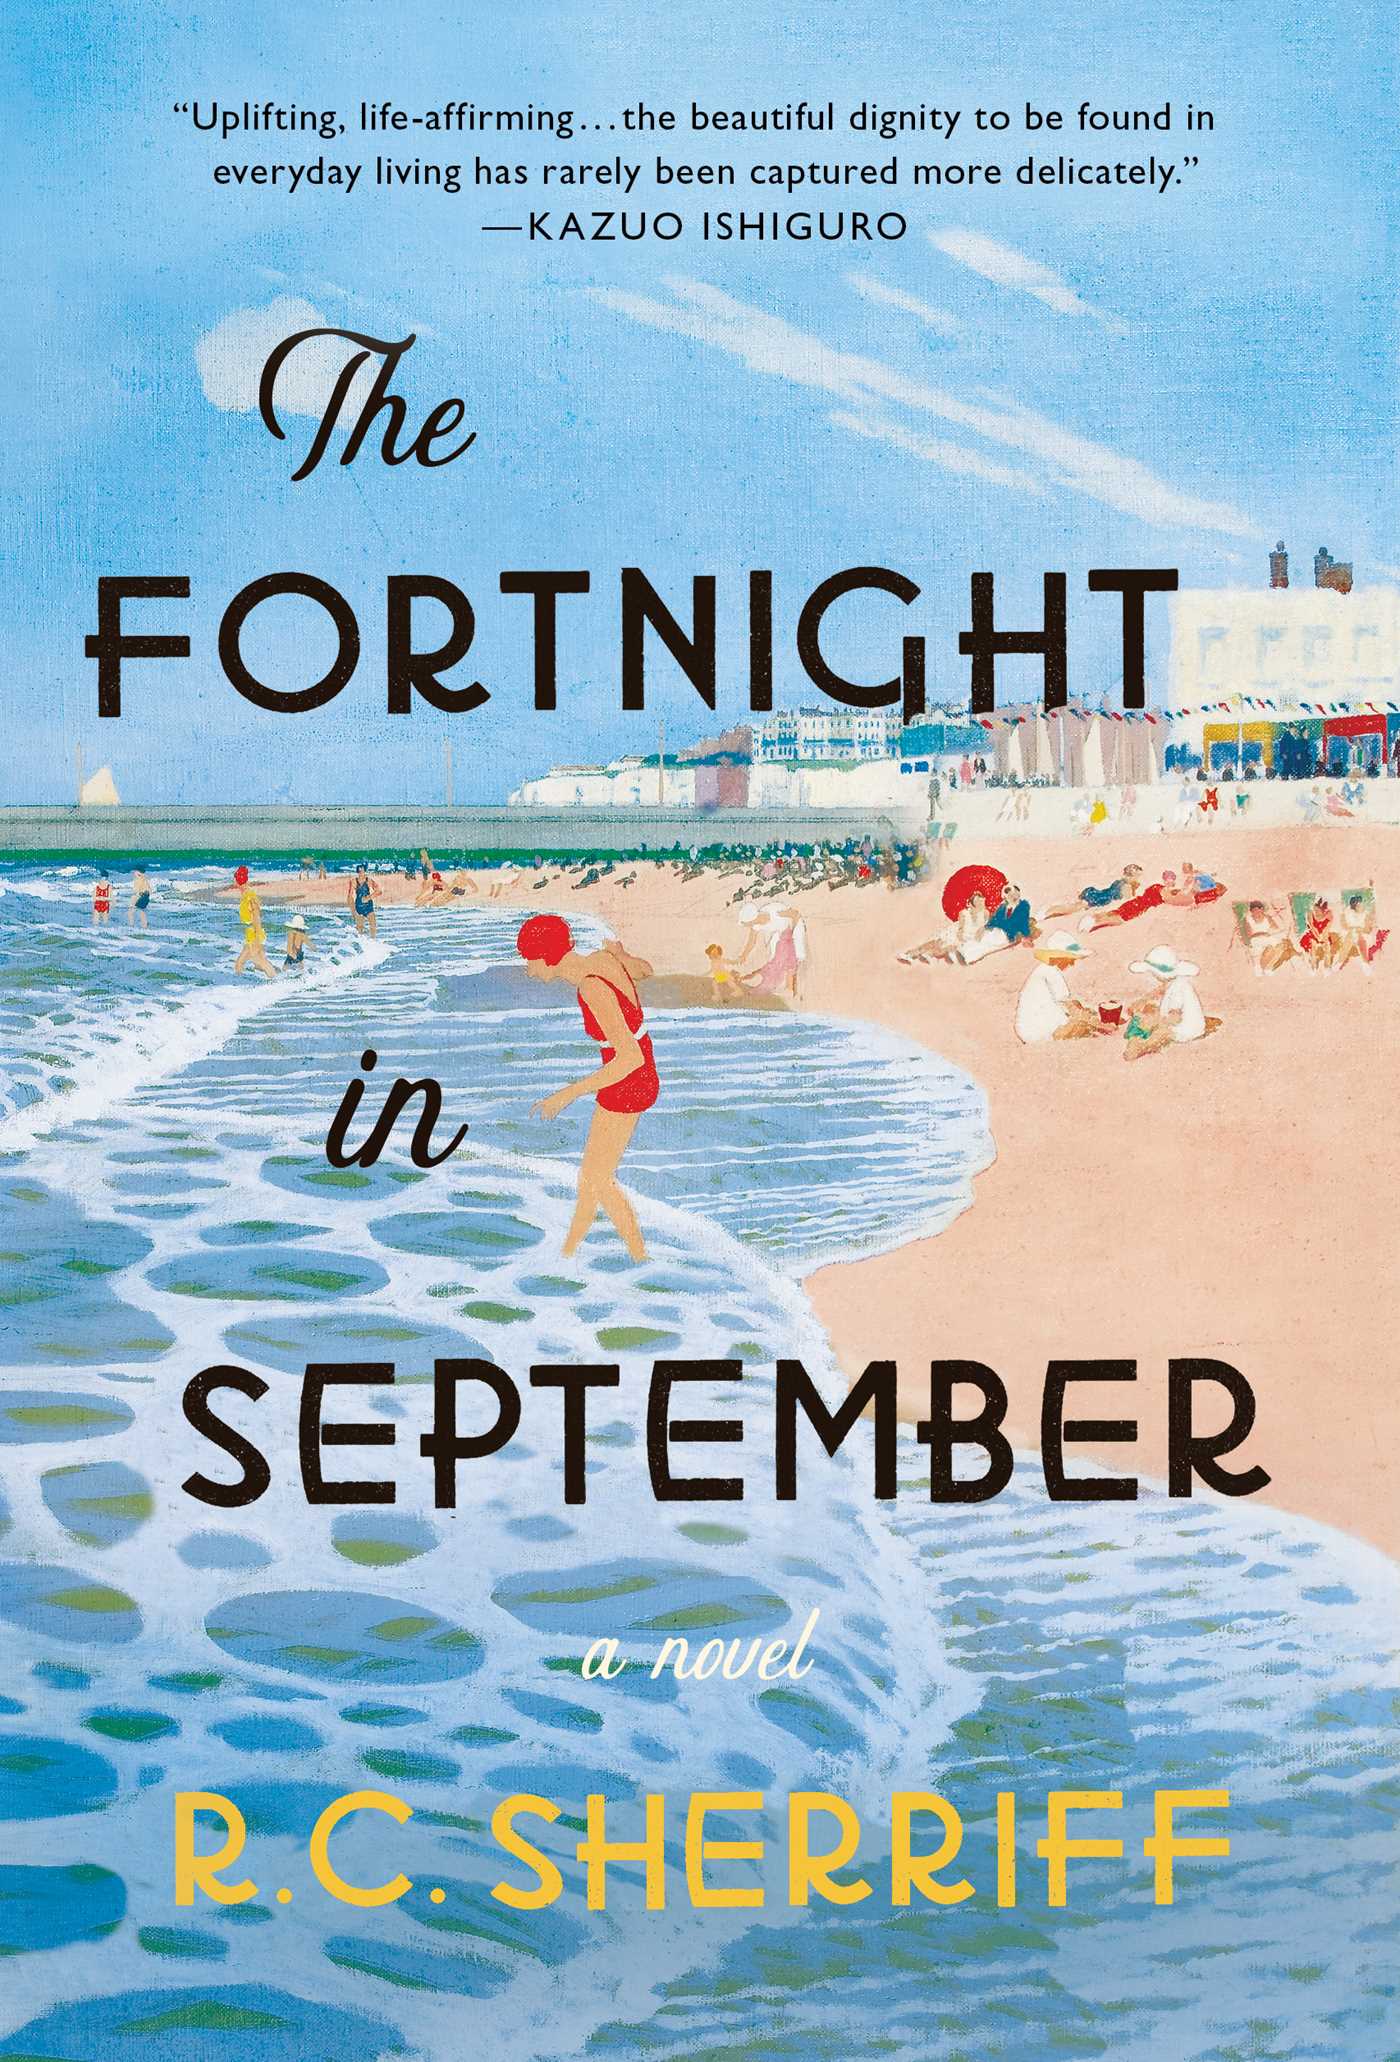 A Fortnight in September by R. C. Sherriff